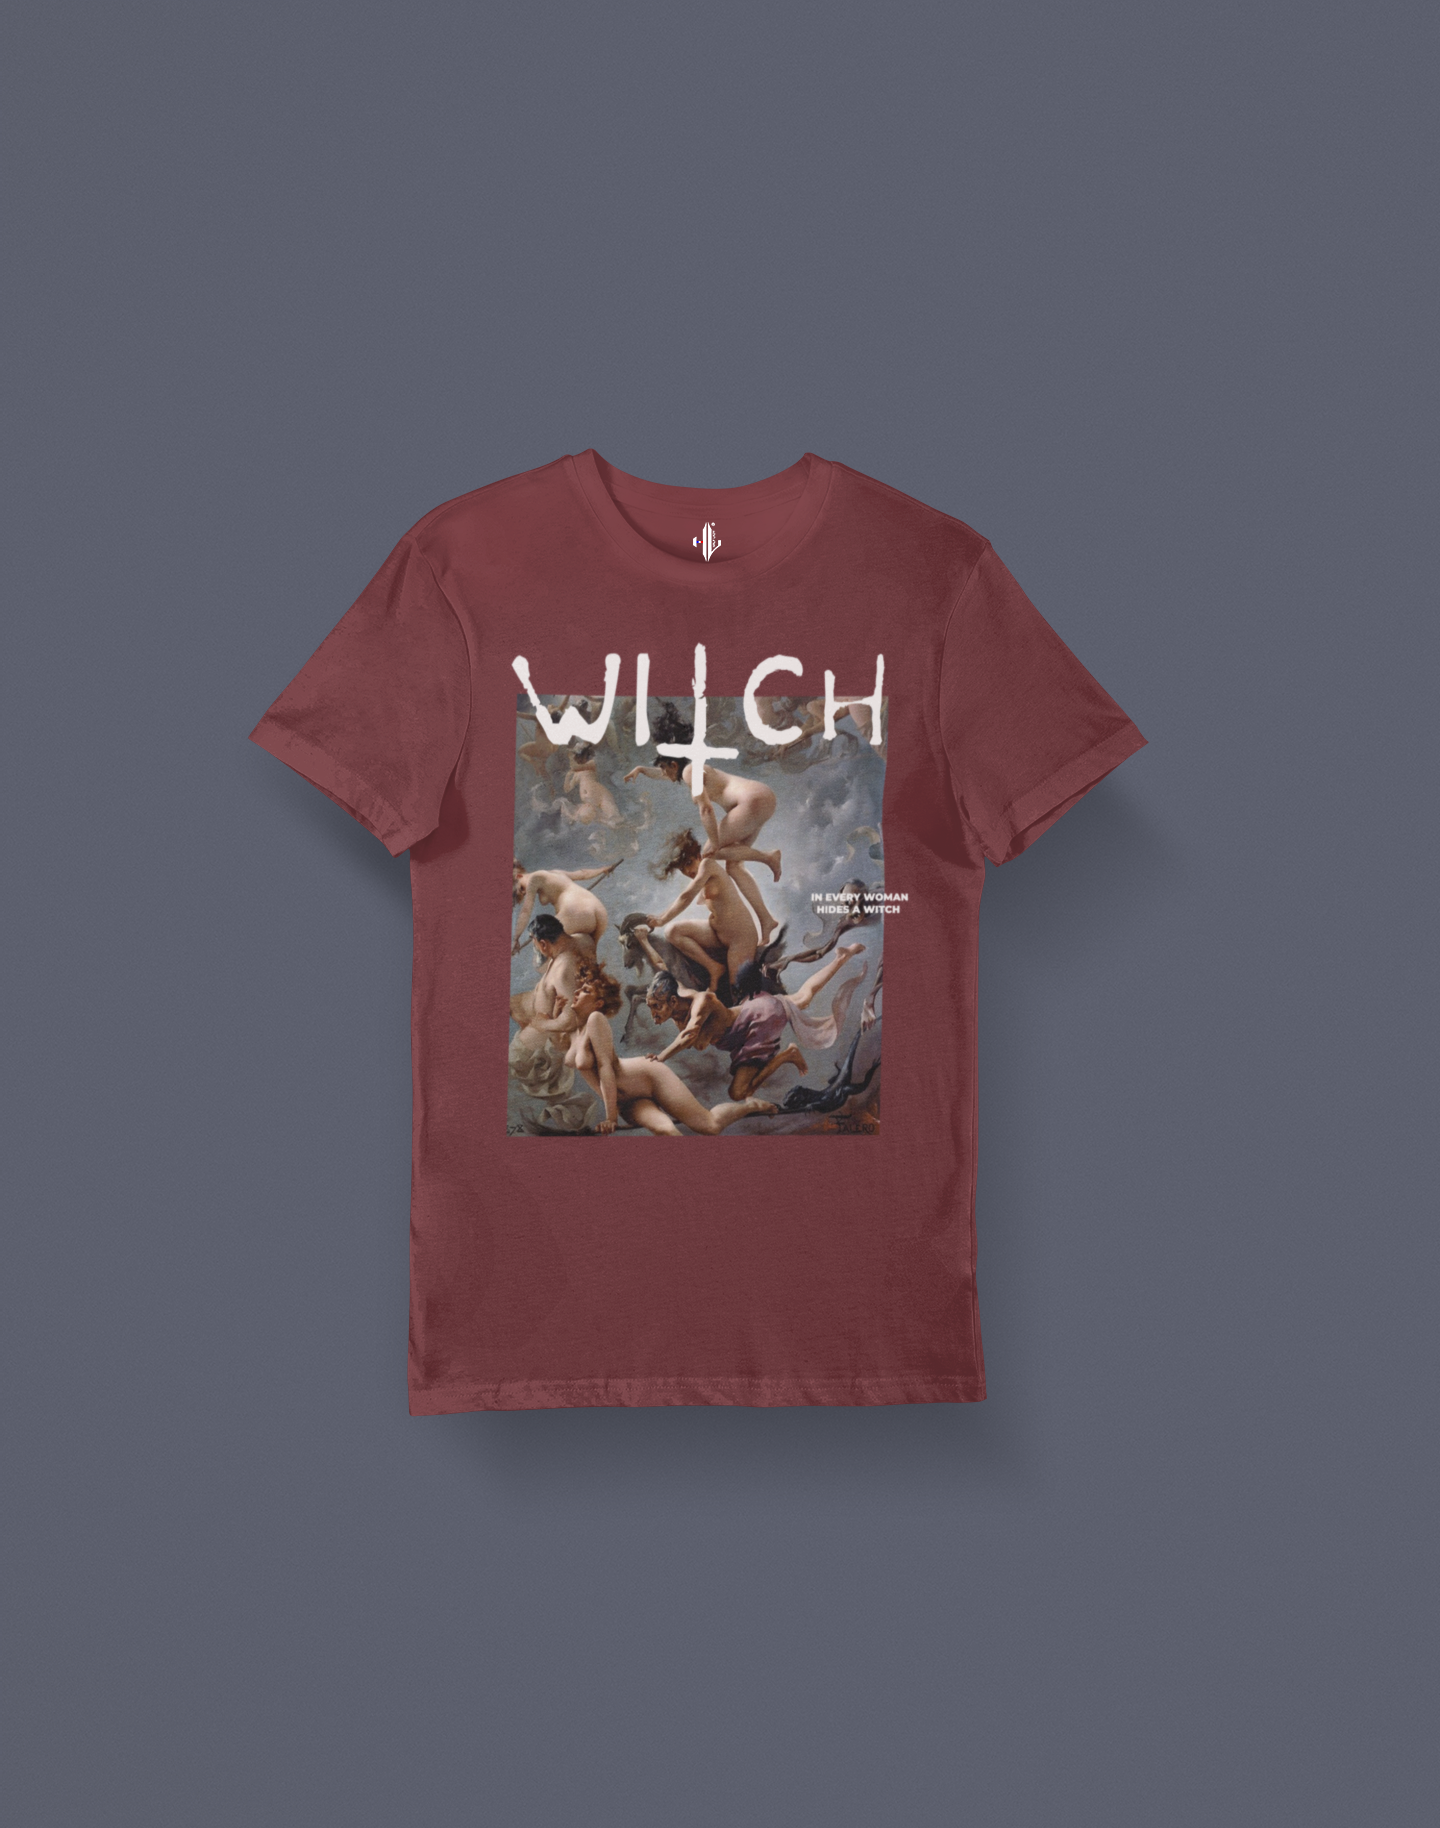 T-shirt "WITCH"